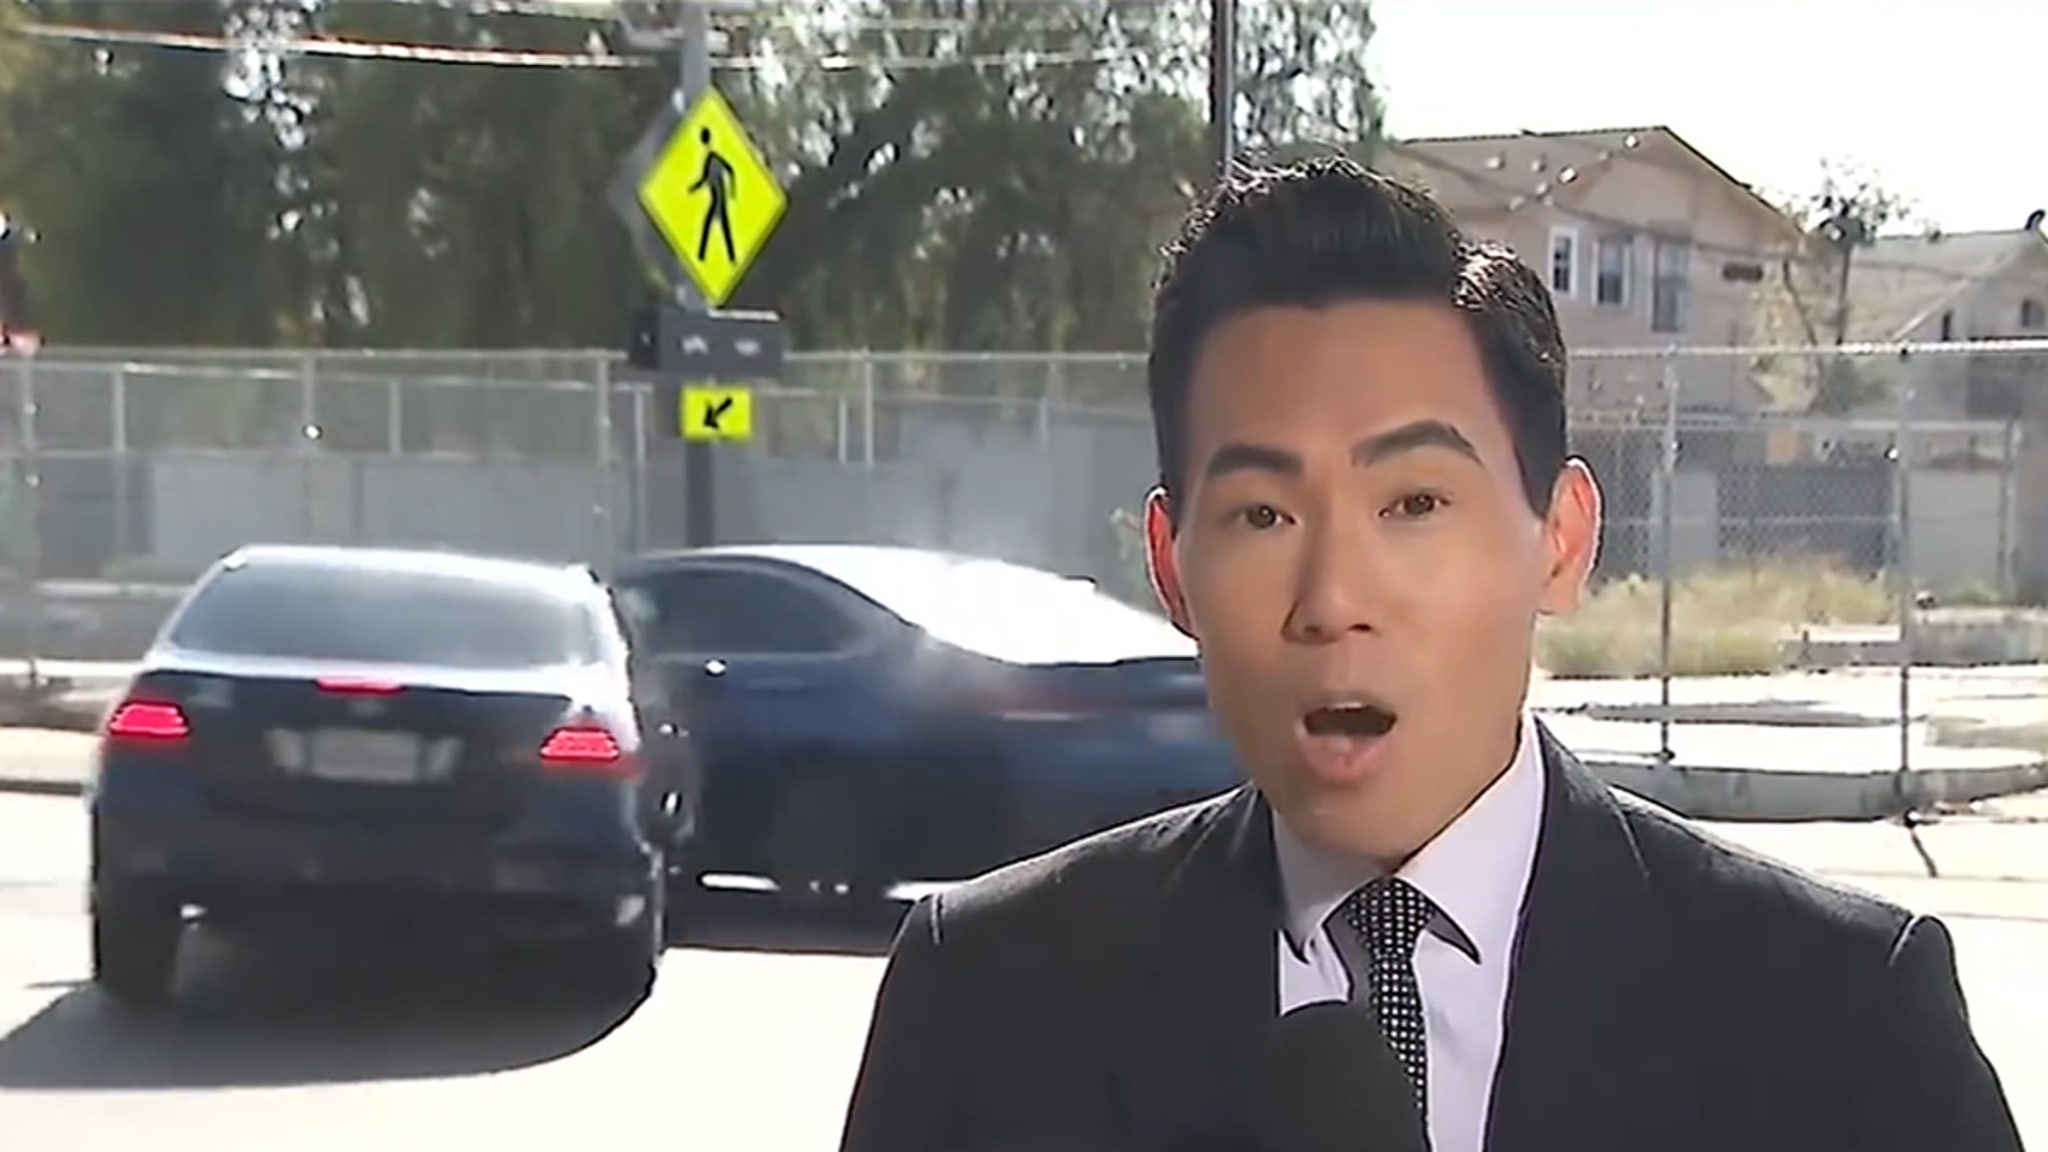 L.A. TV Reporter Witnesses Hit-and-Run During Story on Hit-and-Runs